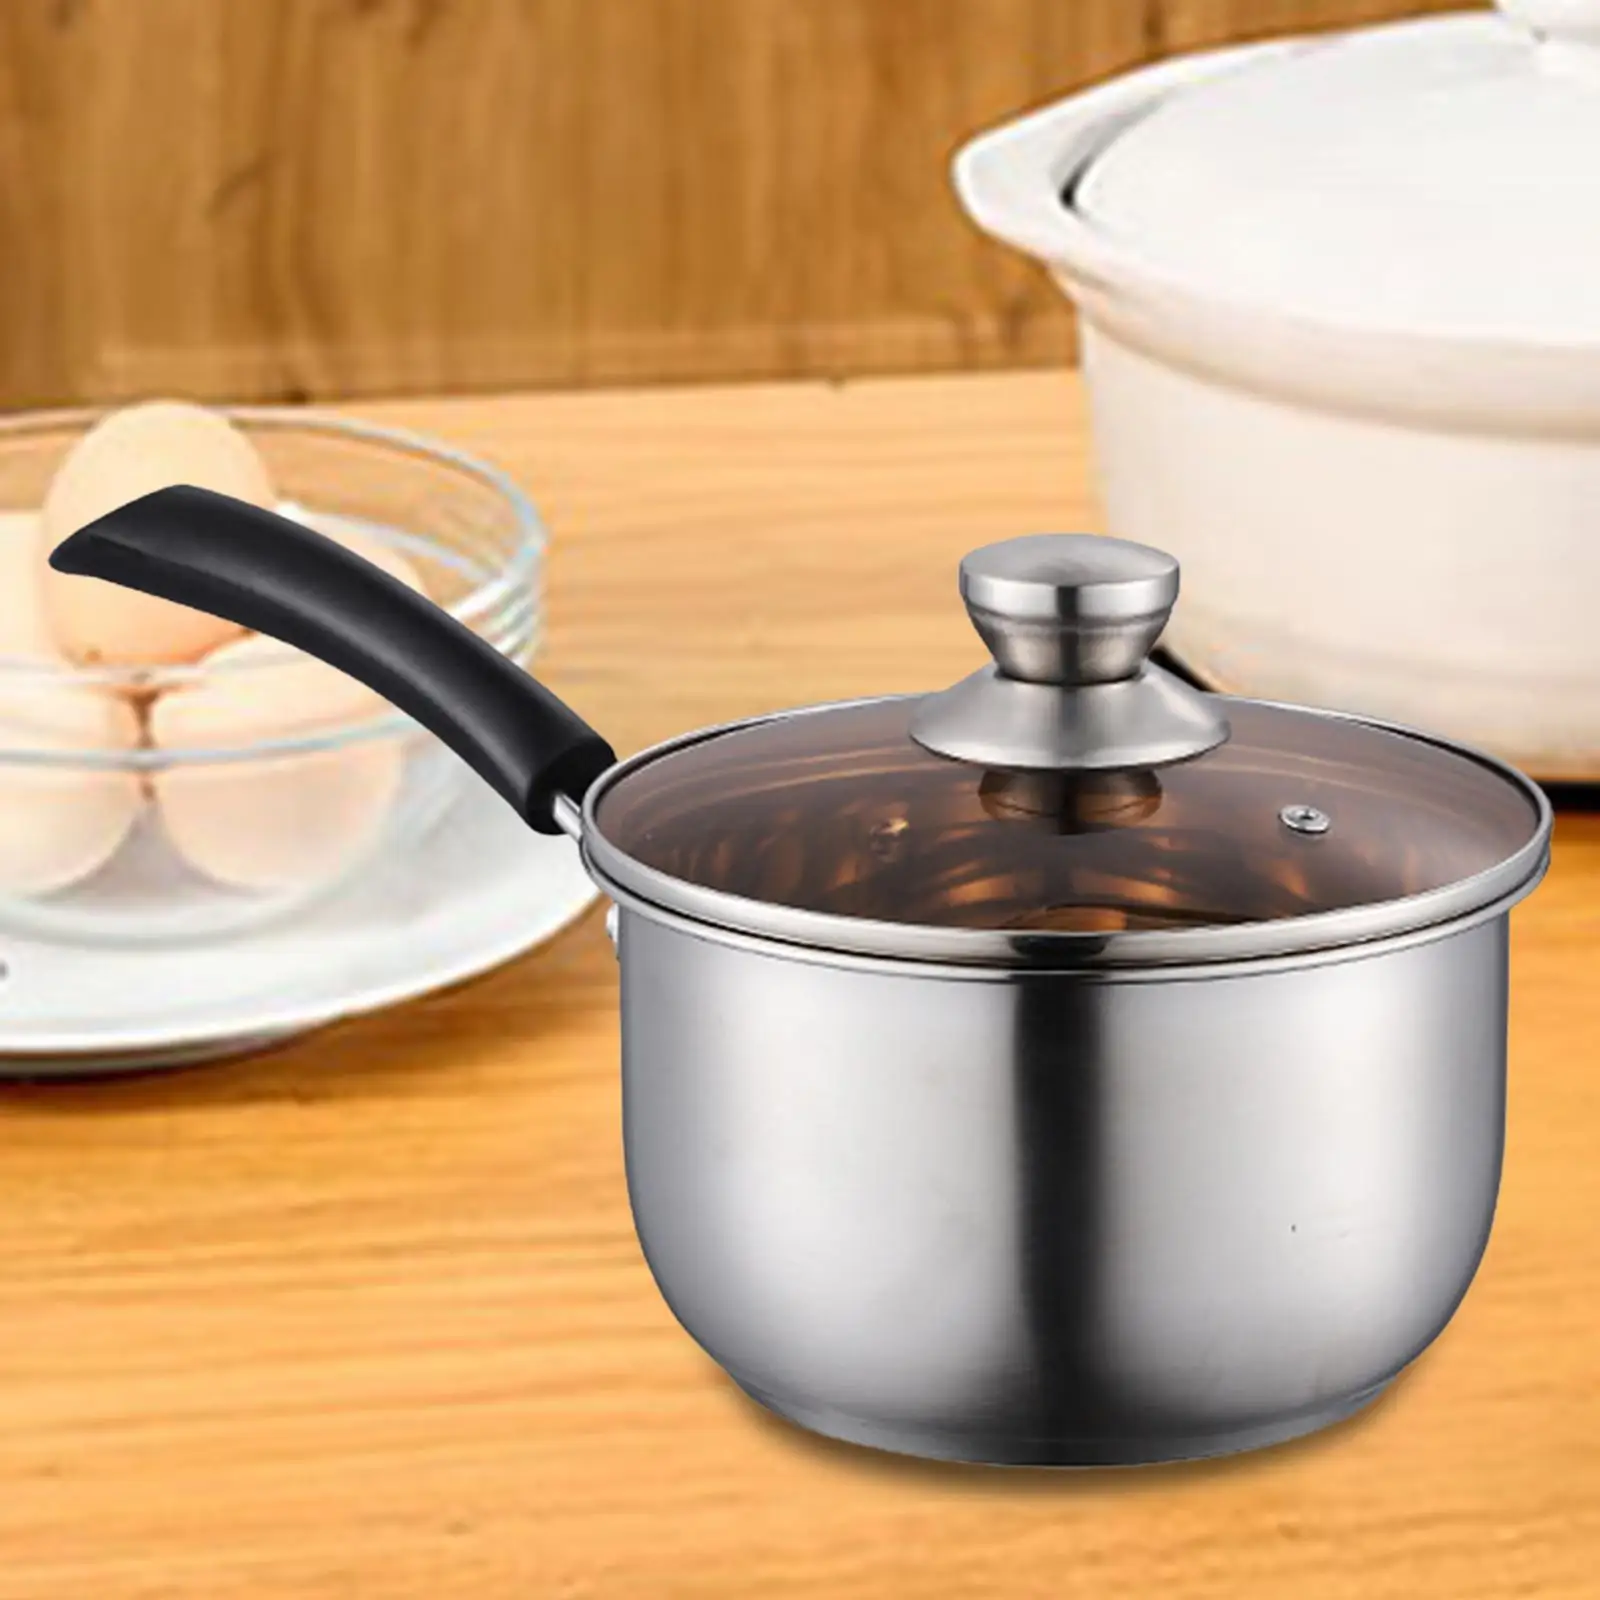 Multipurpose Saucepan with Lid, Cooking Pot, Milk Pot, Butter Warmer for Restaurant Dining Room Kitchen Home